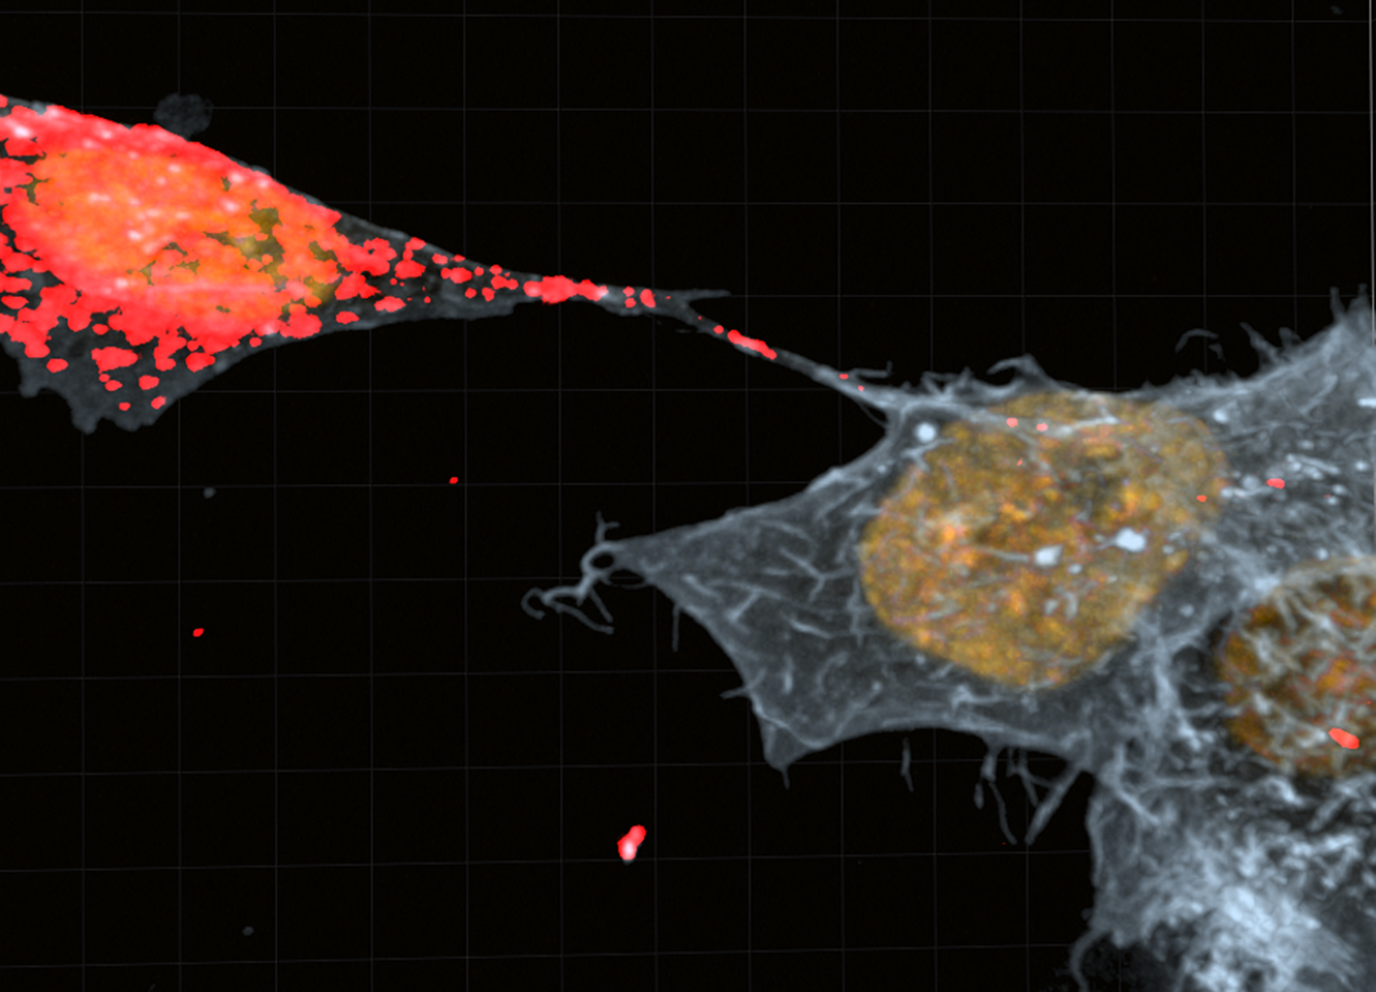 Transfer of 𝛼-Synuclein aggregates (in red) from neuronal cells (left) to microglial cells (right) via Tunneling Nanotubes (TNTs)